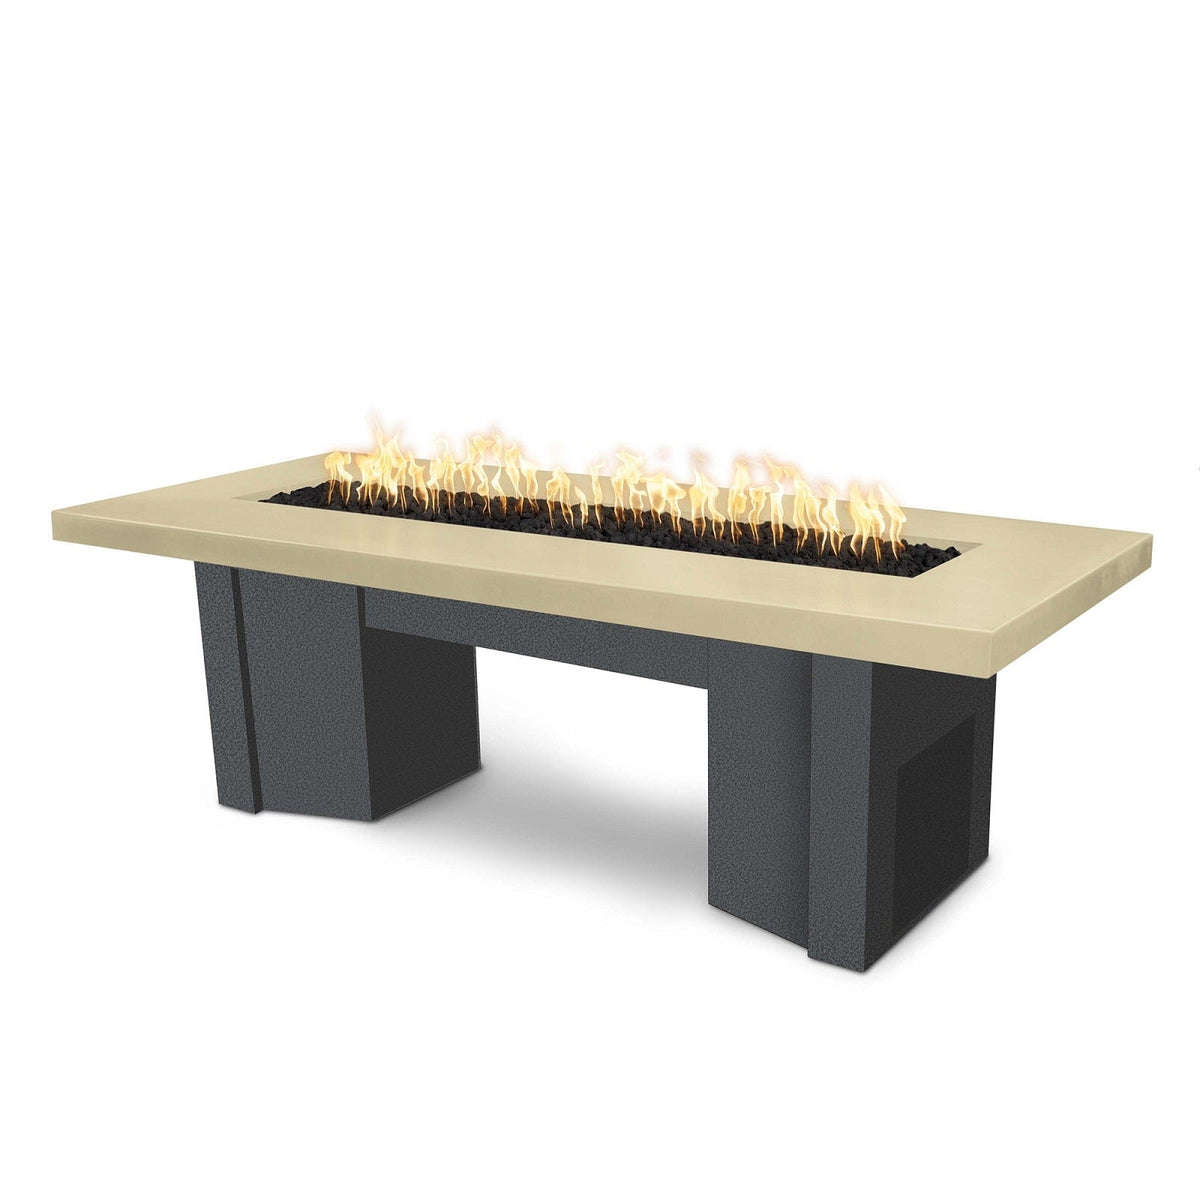 The Outdoor Plus Fire Features Vanilla (-VAN) / Silver Vein Powder Coated Steel (-SLV) The Outdoor Plus 78&quot; Alameda Fire Table Smooth Concrete in Liquid Propane - Match Lit with Flame Sense System / OPT-ALMGFRC78FSML-LP